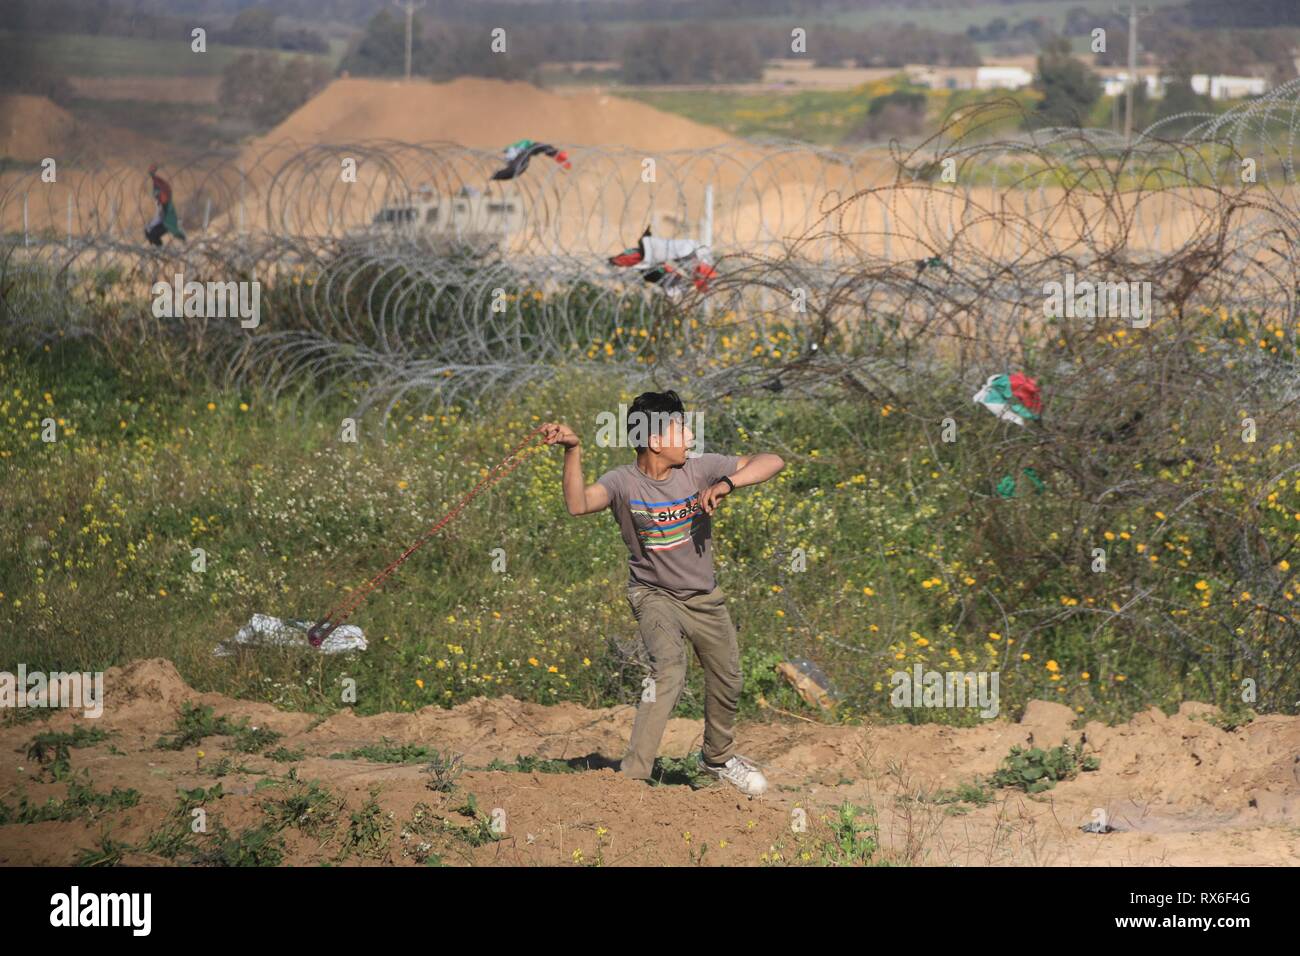 March 8, 2019 - Al-Buraj Refugee Camp, The Gaza Strip, Palestine - Palestinian protesters east of al-Buraj refugee camp in central of the Gaza Strip during friday clashes, Gaza health ministry said a Palestinian protester shot died and 50 others wounded. Credit: Mahmoud Khattab/Quds Net News/ZUMA Wire/Alamy Live News Stock Photo